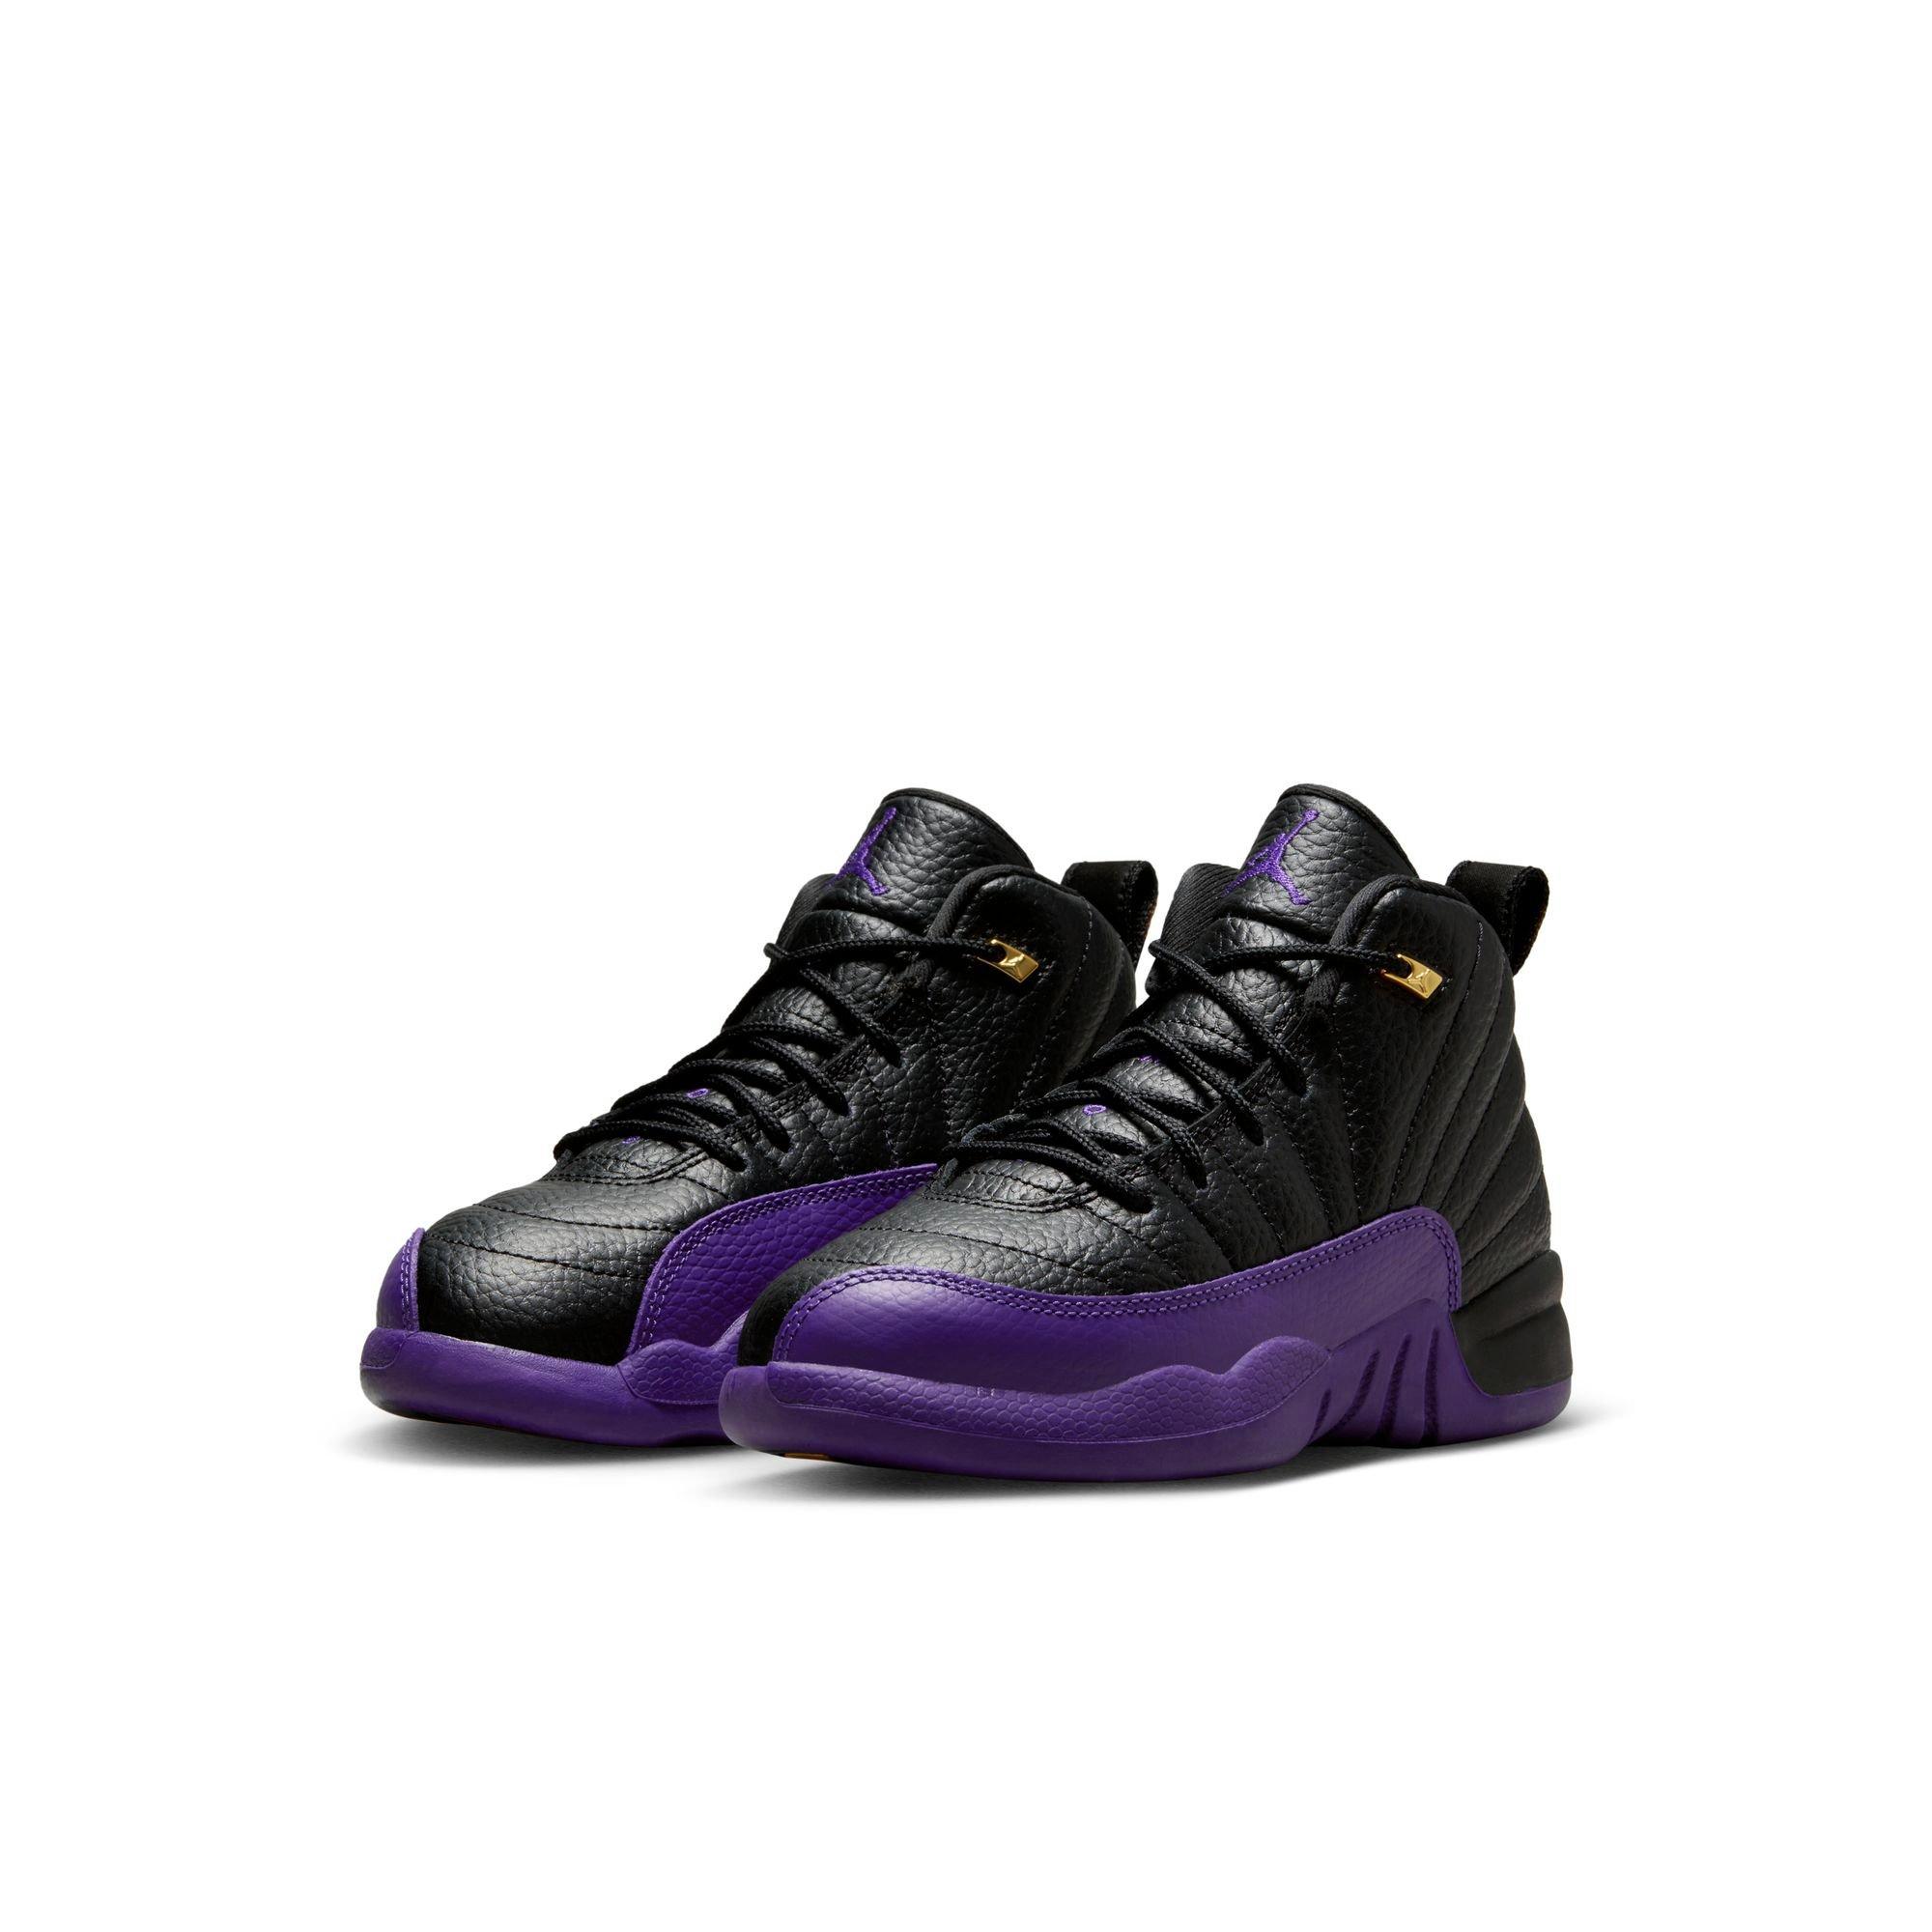 Air Jordan 12 Pro Purples , come check em out in store at willowgrovep